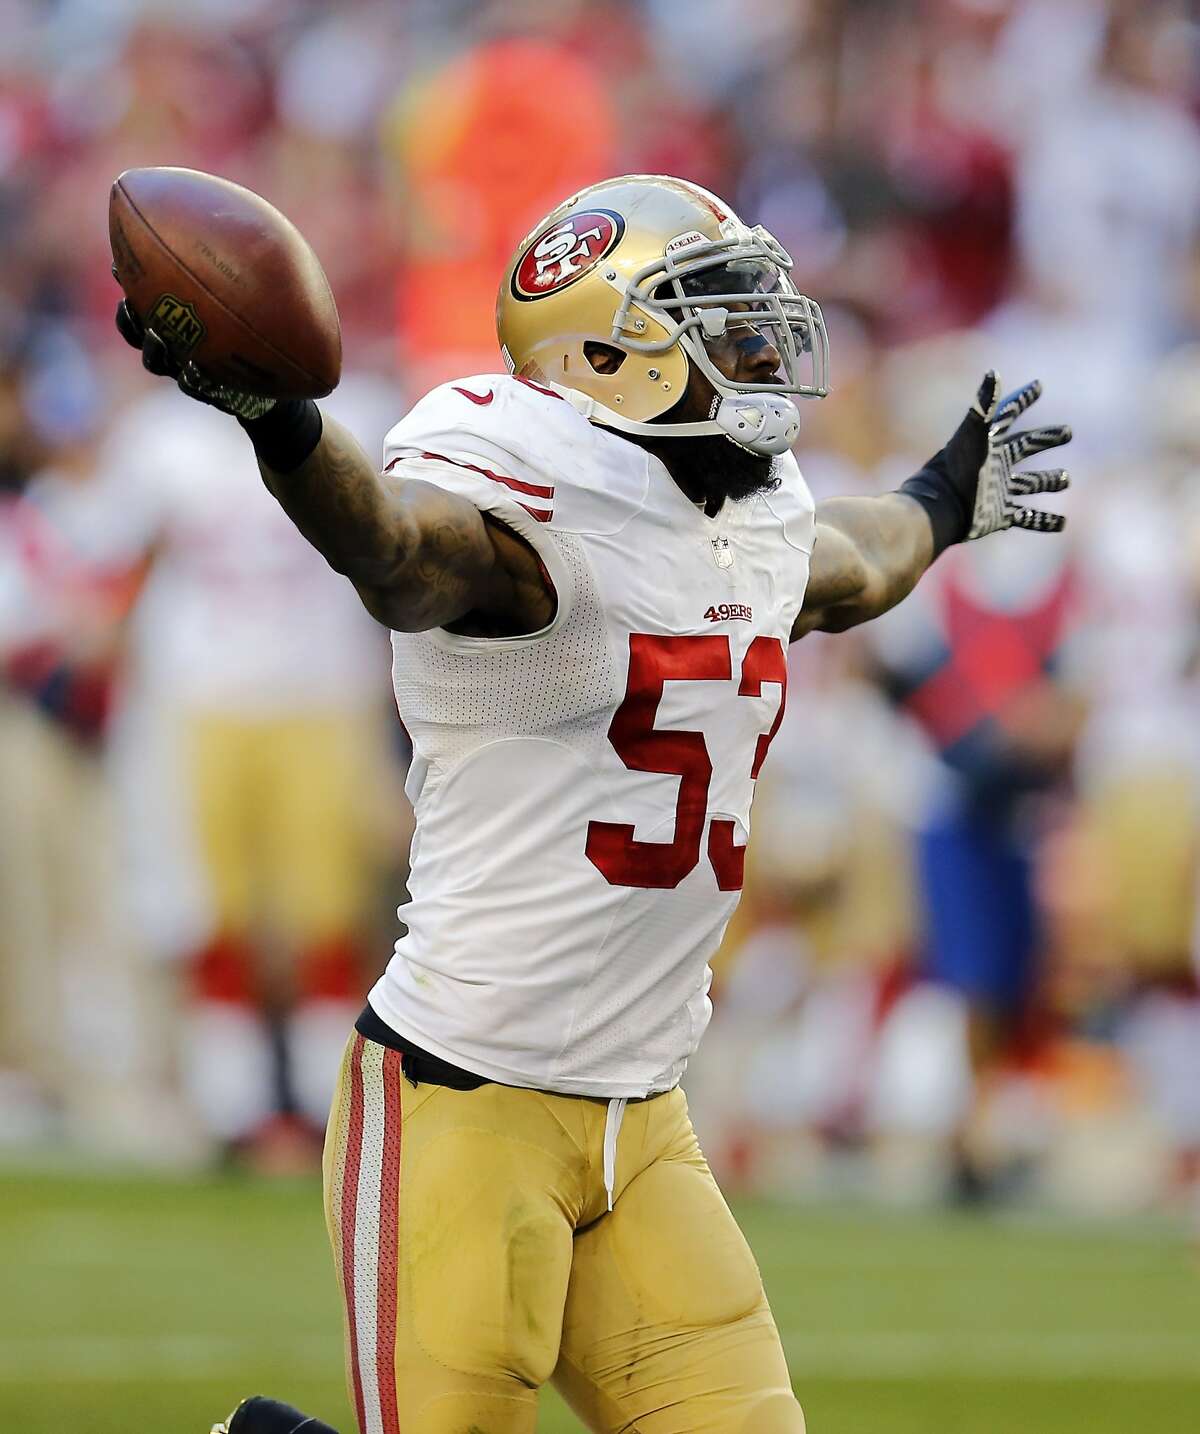 San Francisco 49ers inside linebacker NaVorro Bowman celebrates is fumble recovery against the Arizona Cardinals during the second half of an NFL football game, Sunday, Dec. 29, 2013, in Glendale, Ariz. (AP Photo/Matt York)